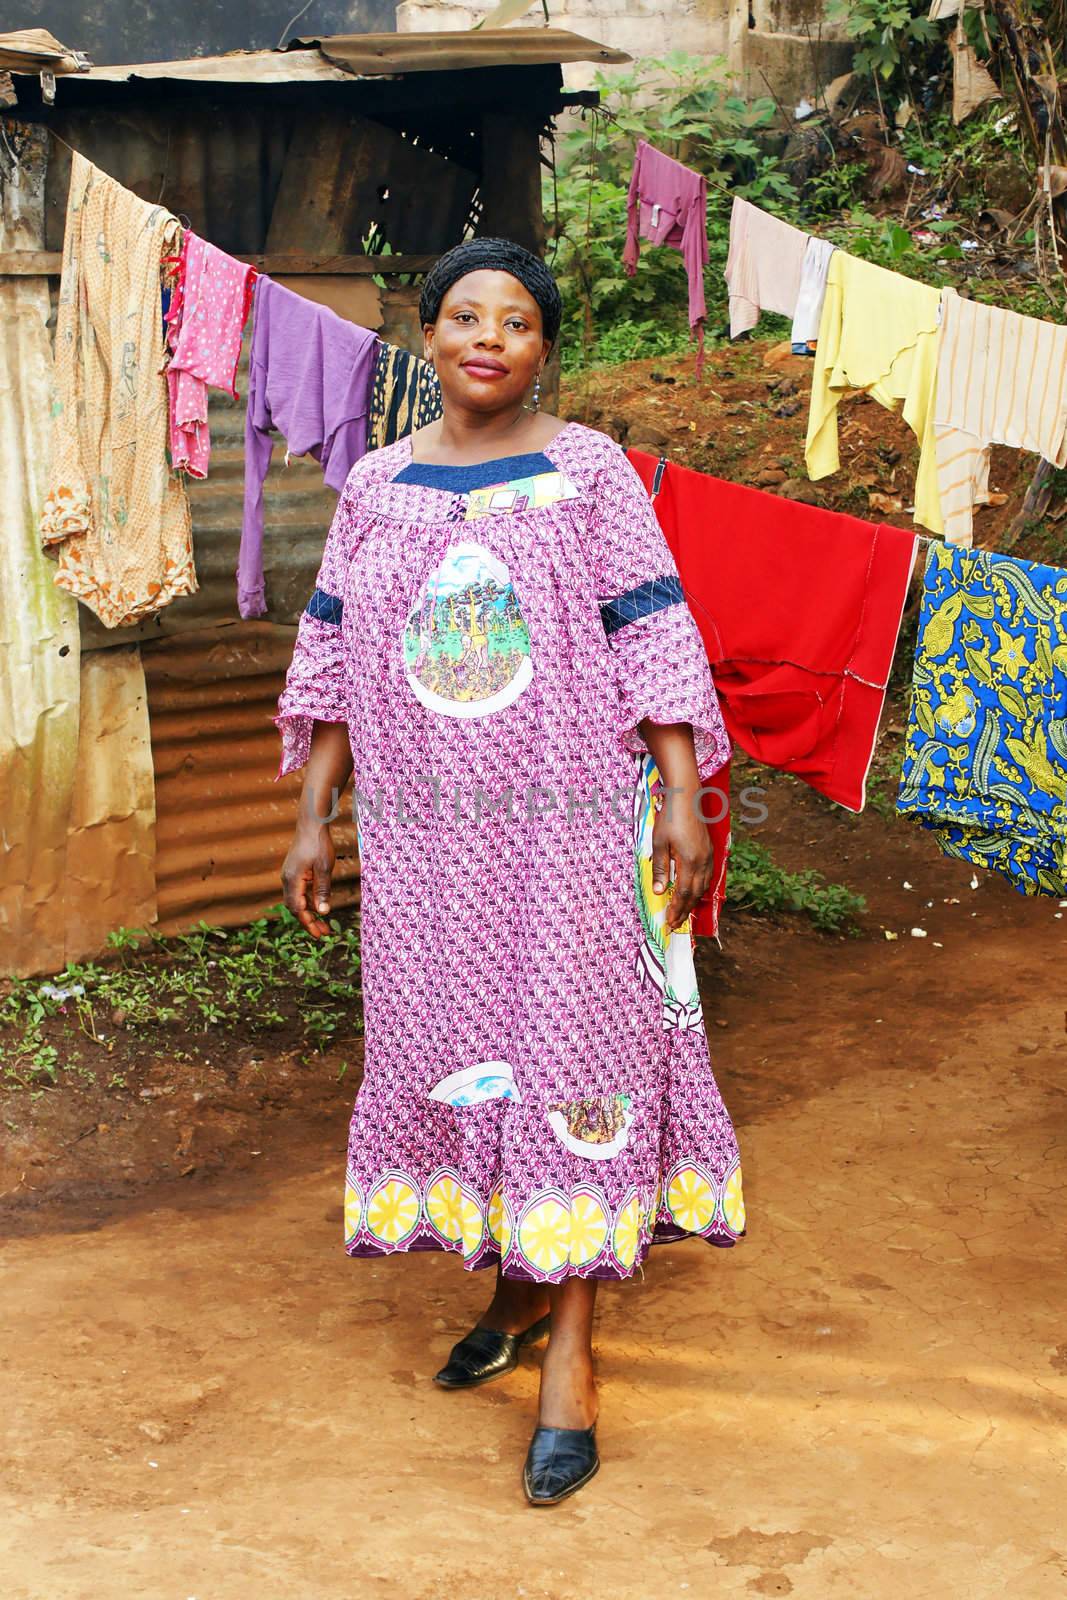 Pregnant black African woman in her backyard with clothesline.